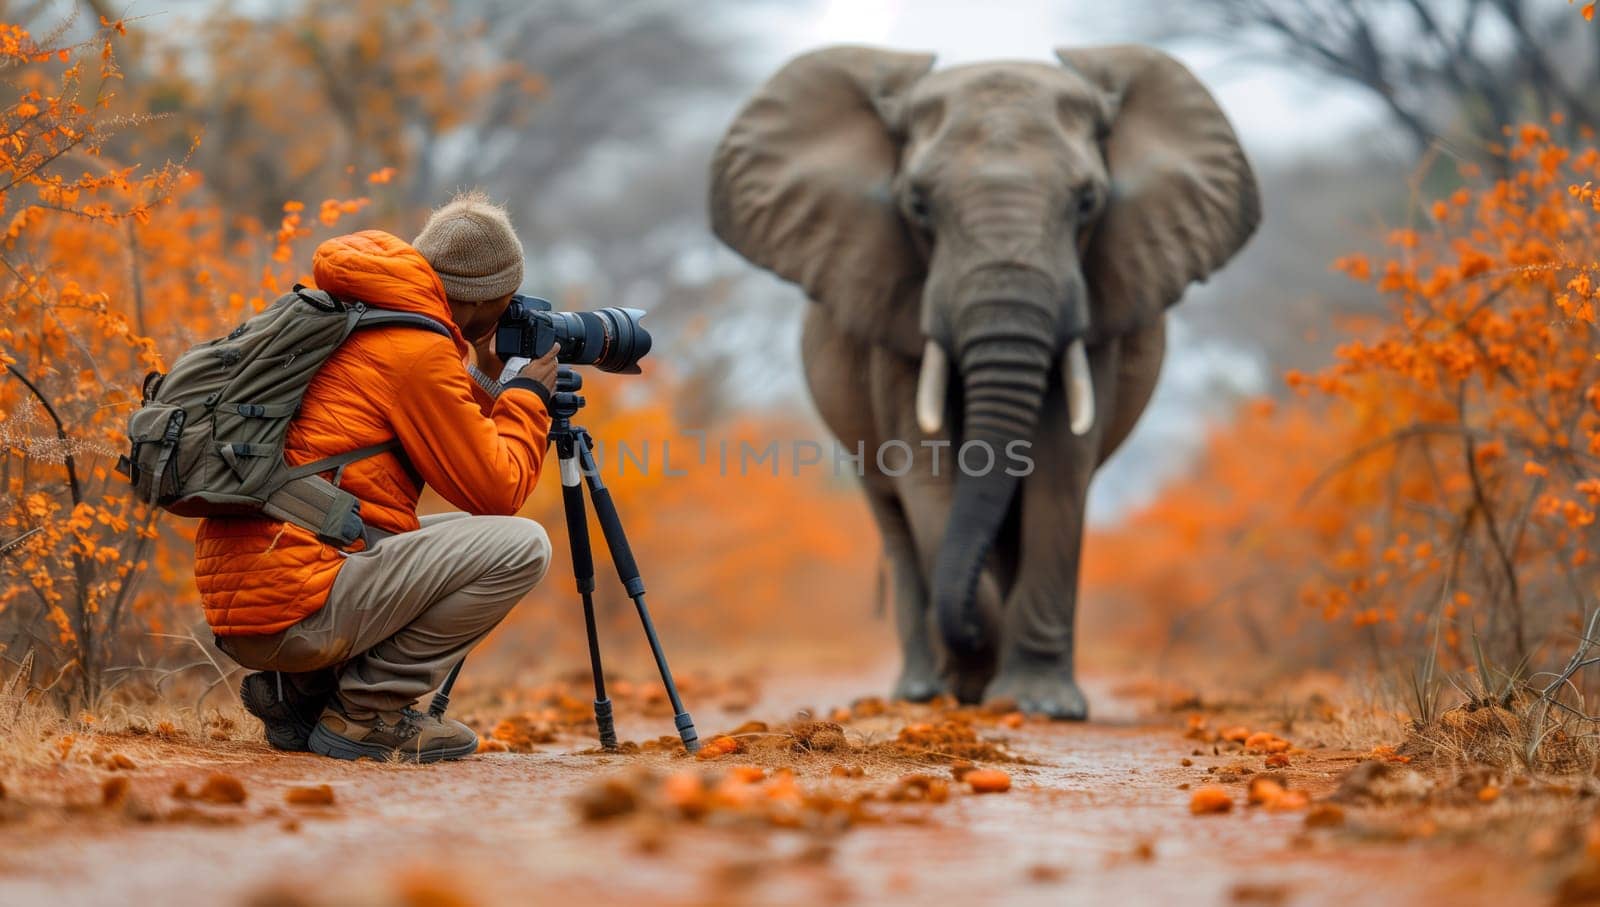 Kneeling man photographs a large elephant in its natural environment by richwolf